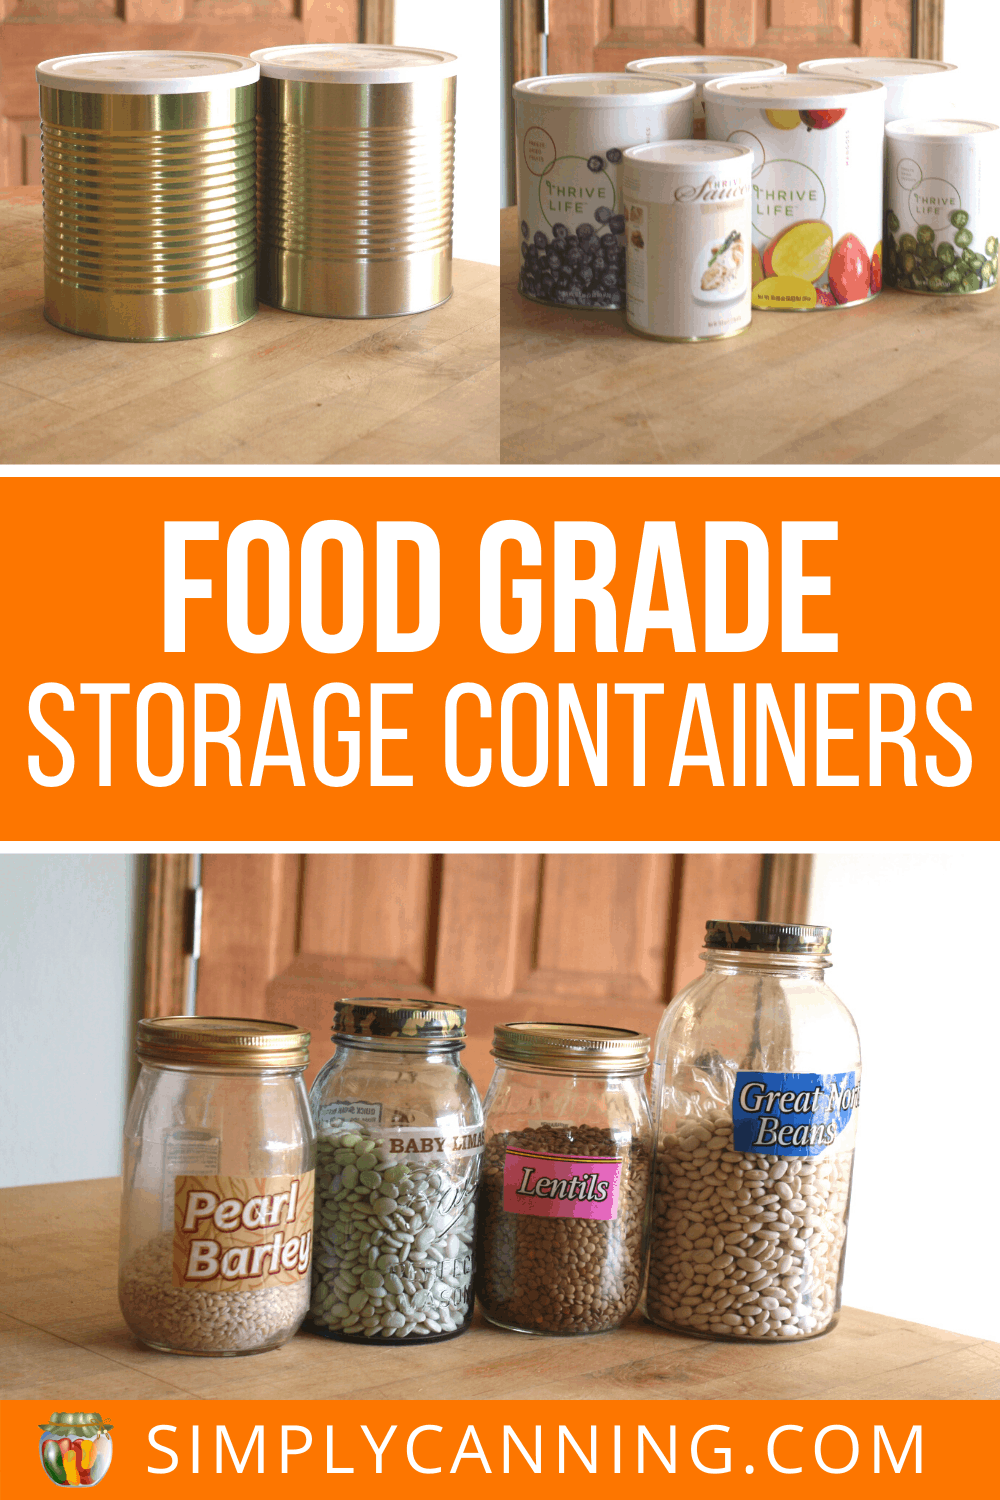 Food grade storage containers:Guidelines for what is safe food storage